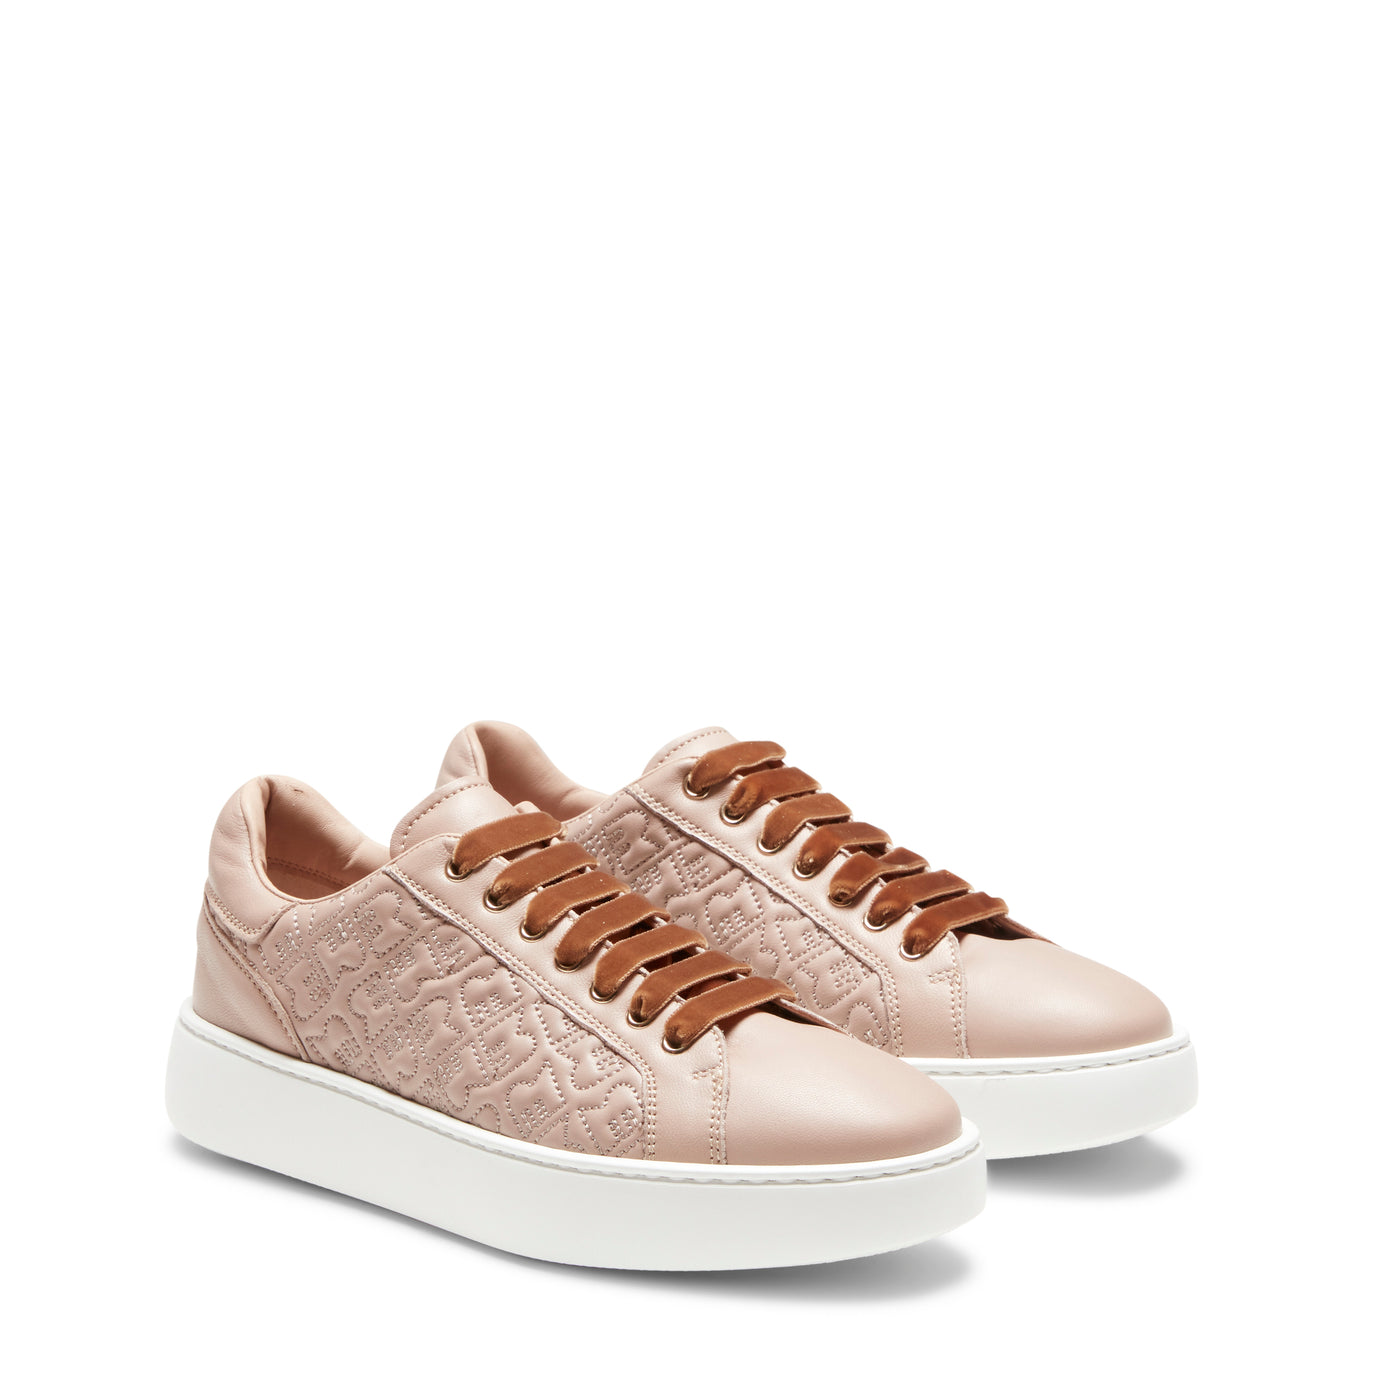 Shop The Latest Collection Of Fratelli Rossetti Fr W Sneakers-76629 In Lebanon